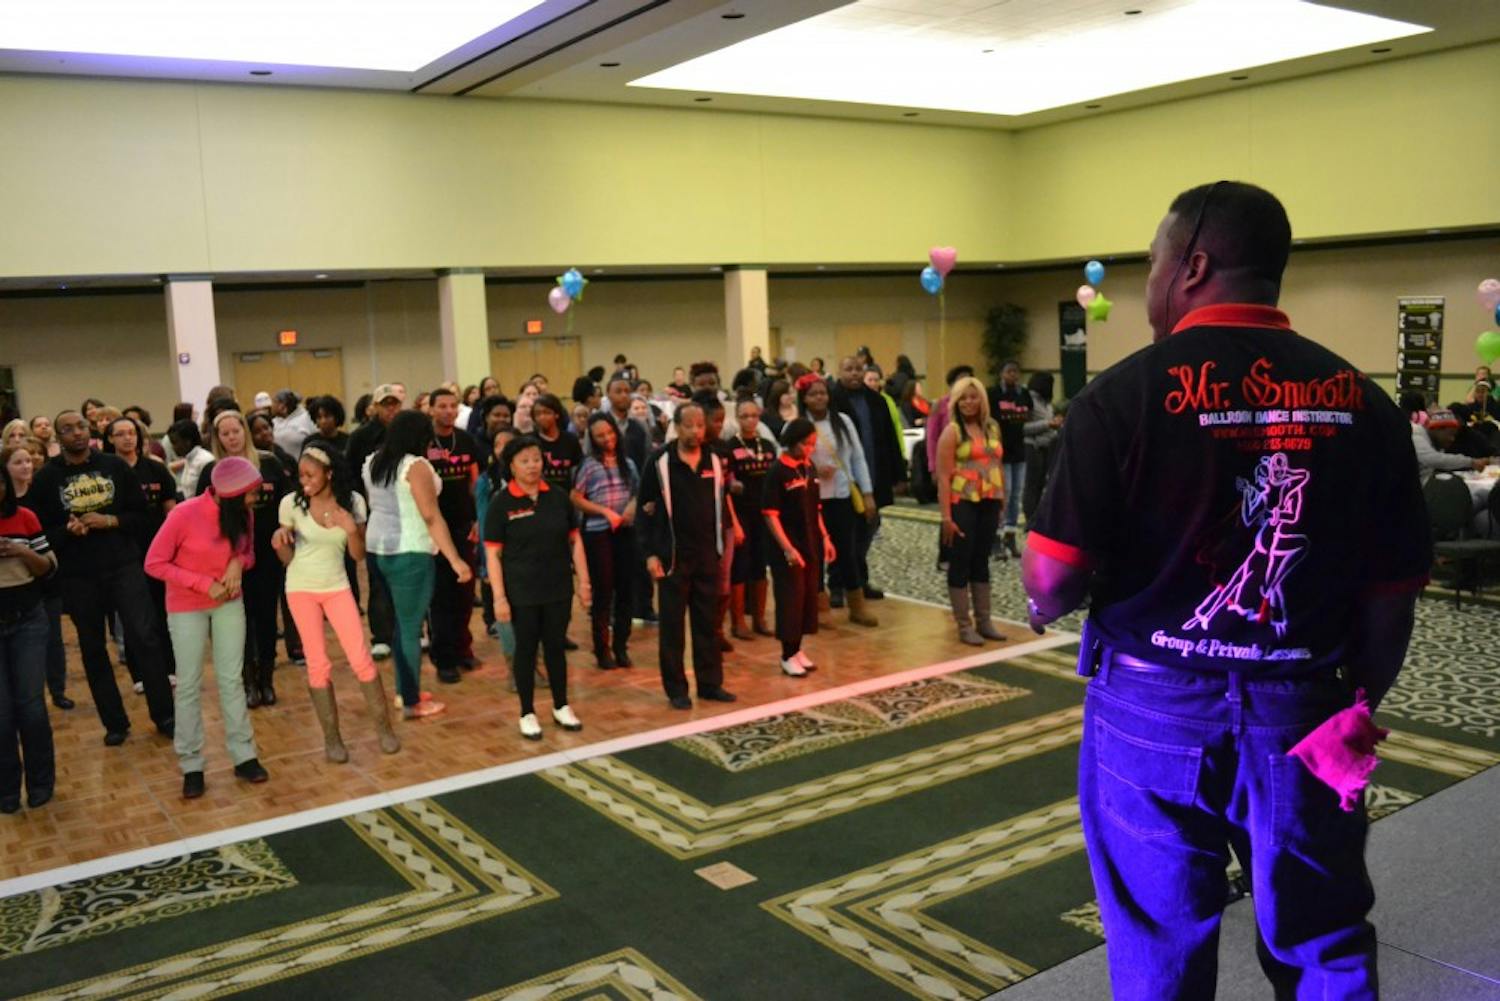 	The Hustle Your Heart Out event brought in more than 500 guests.